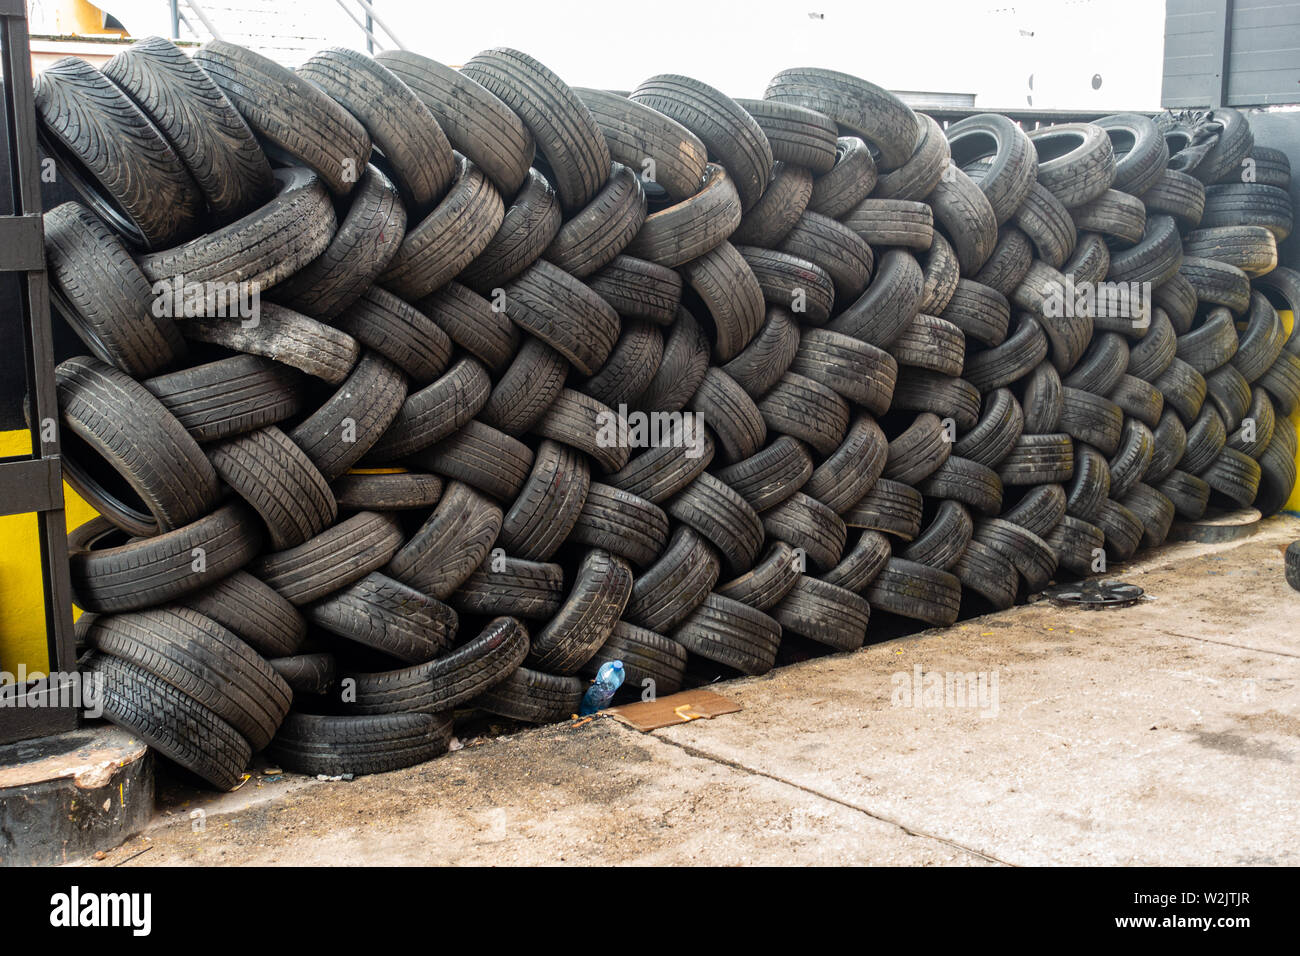 Pile of tyres Stock Photo